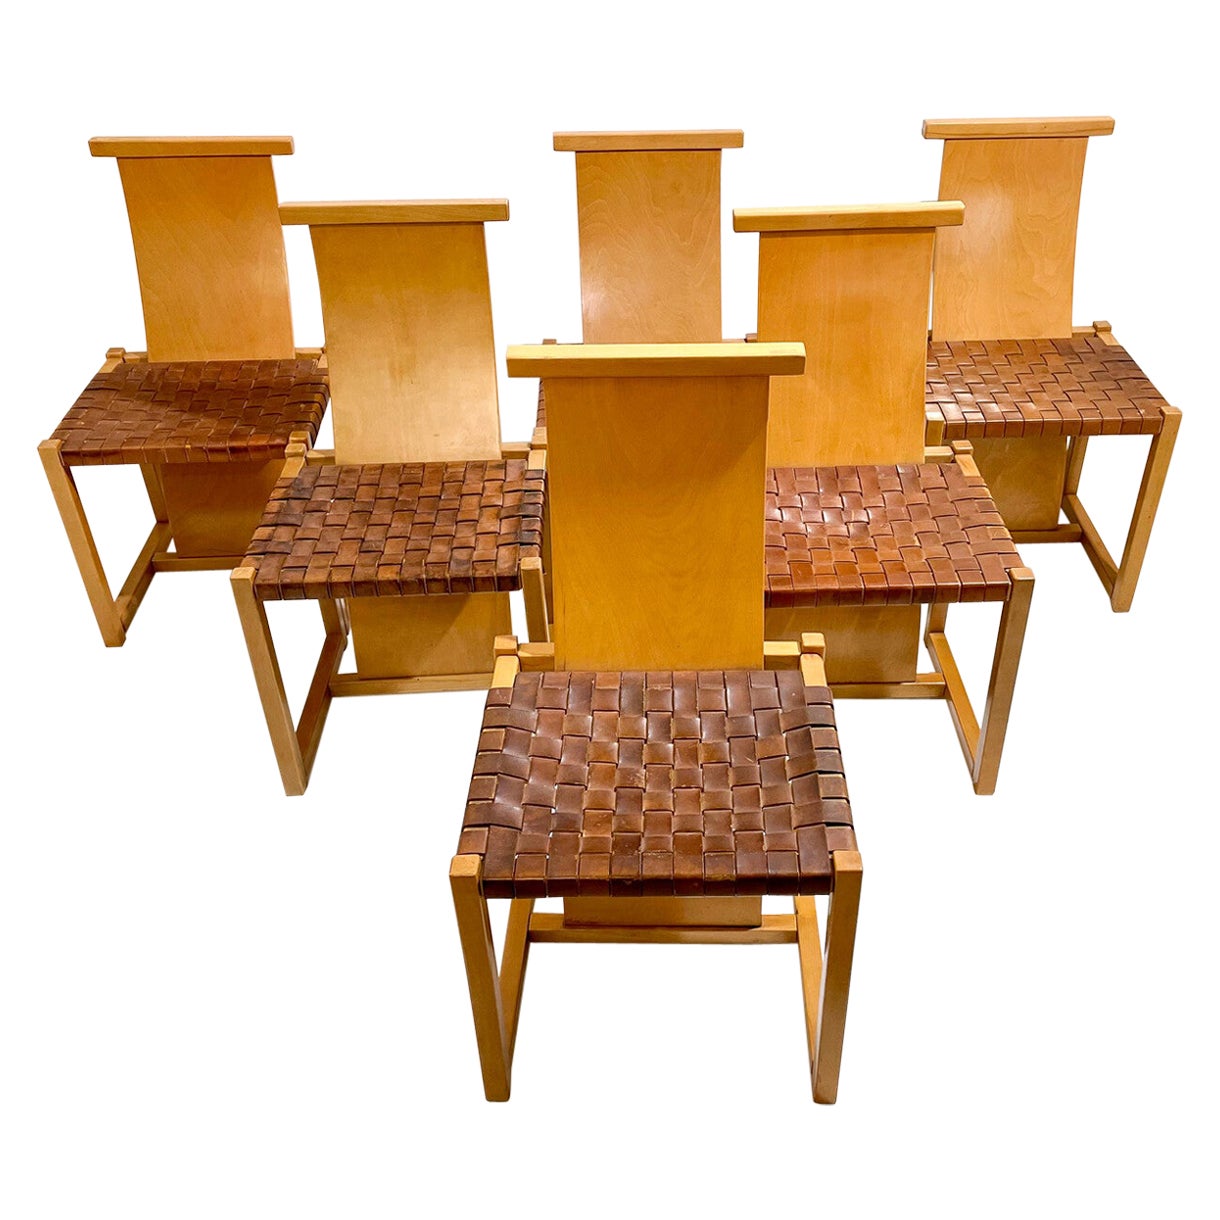 Mid-Century Modern Set of 6 Wood and Leather Chairs, Italy, 1950s For Sale